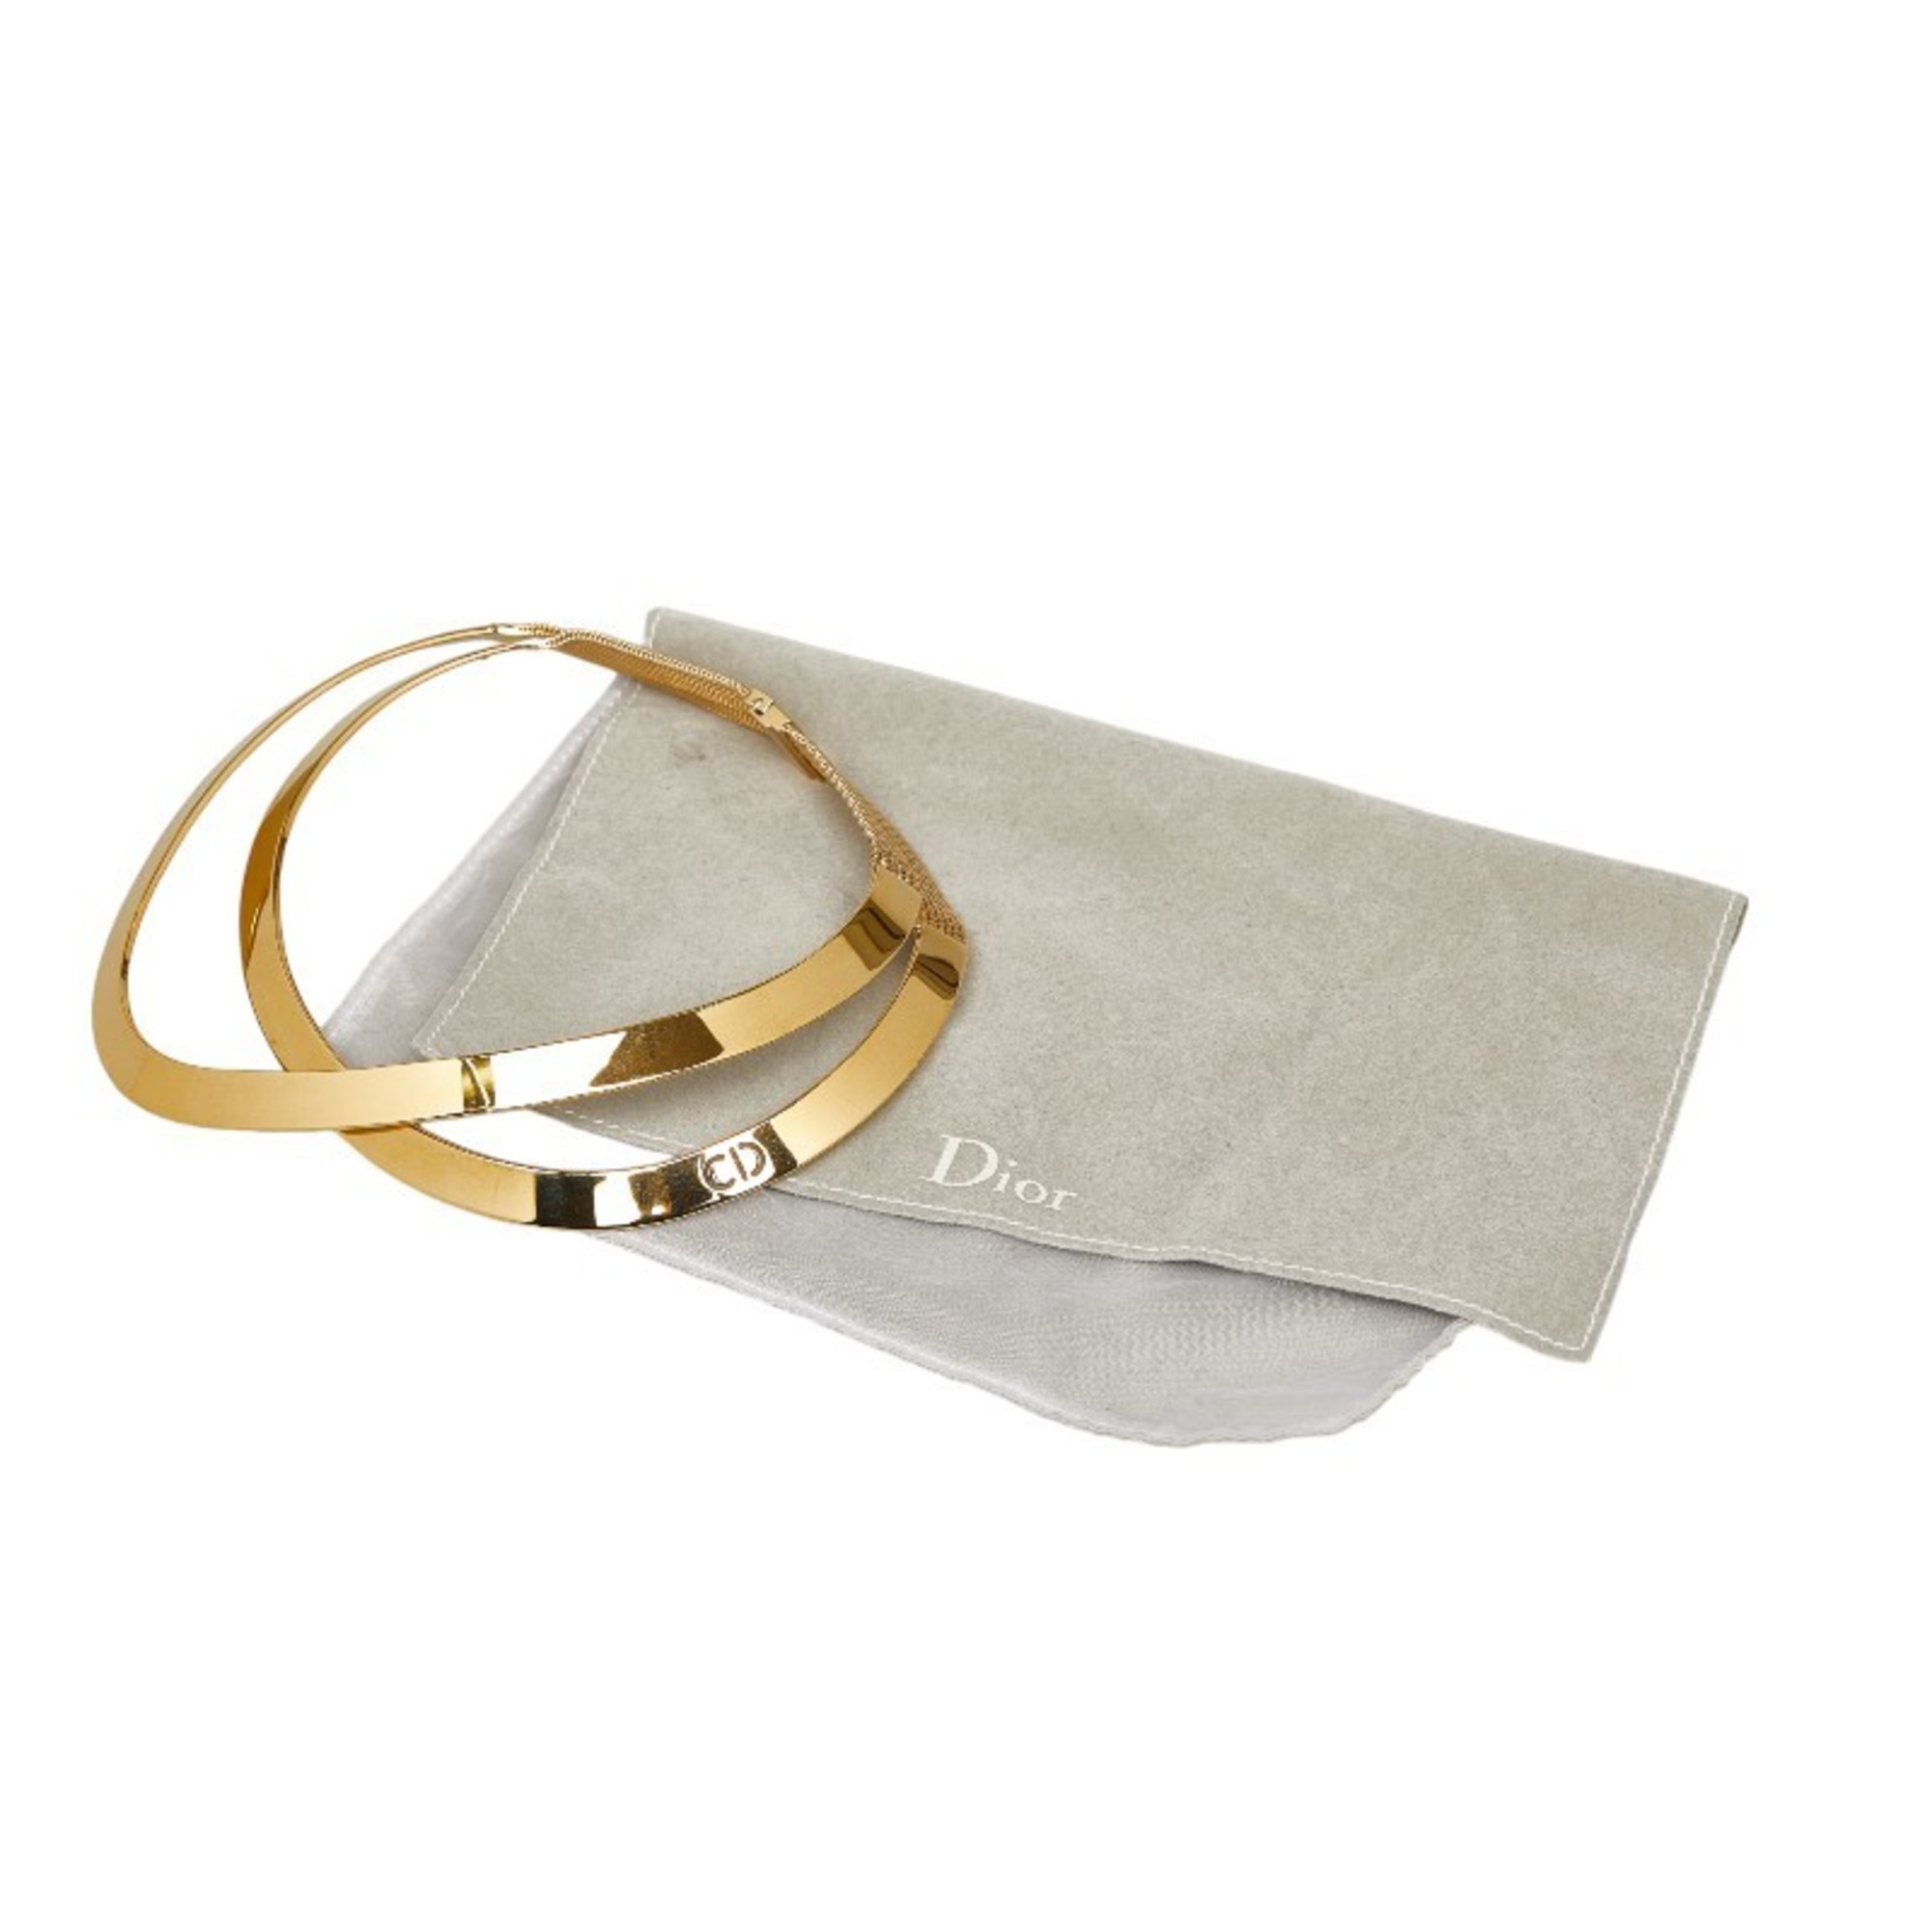 Christian Dior Dior Choker Necklace Gold Plated Women's